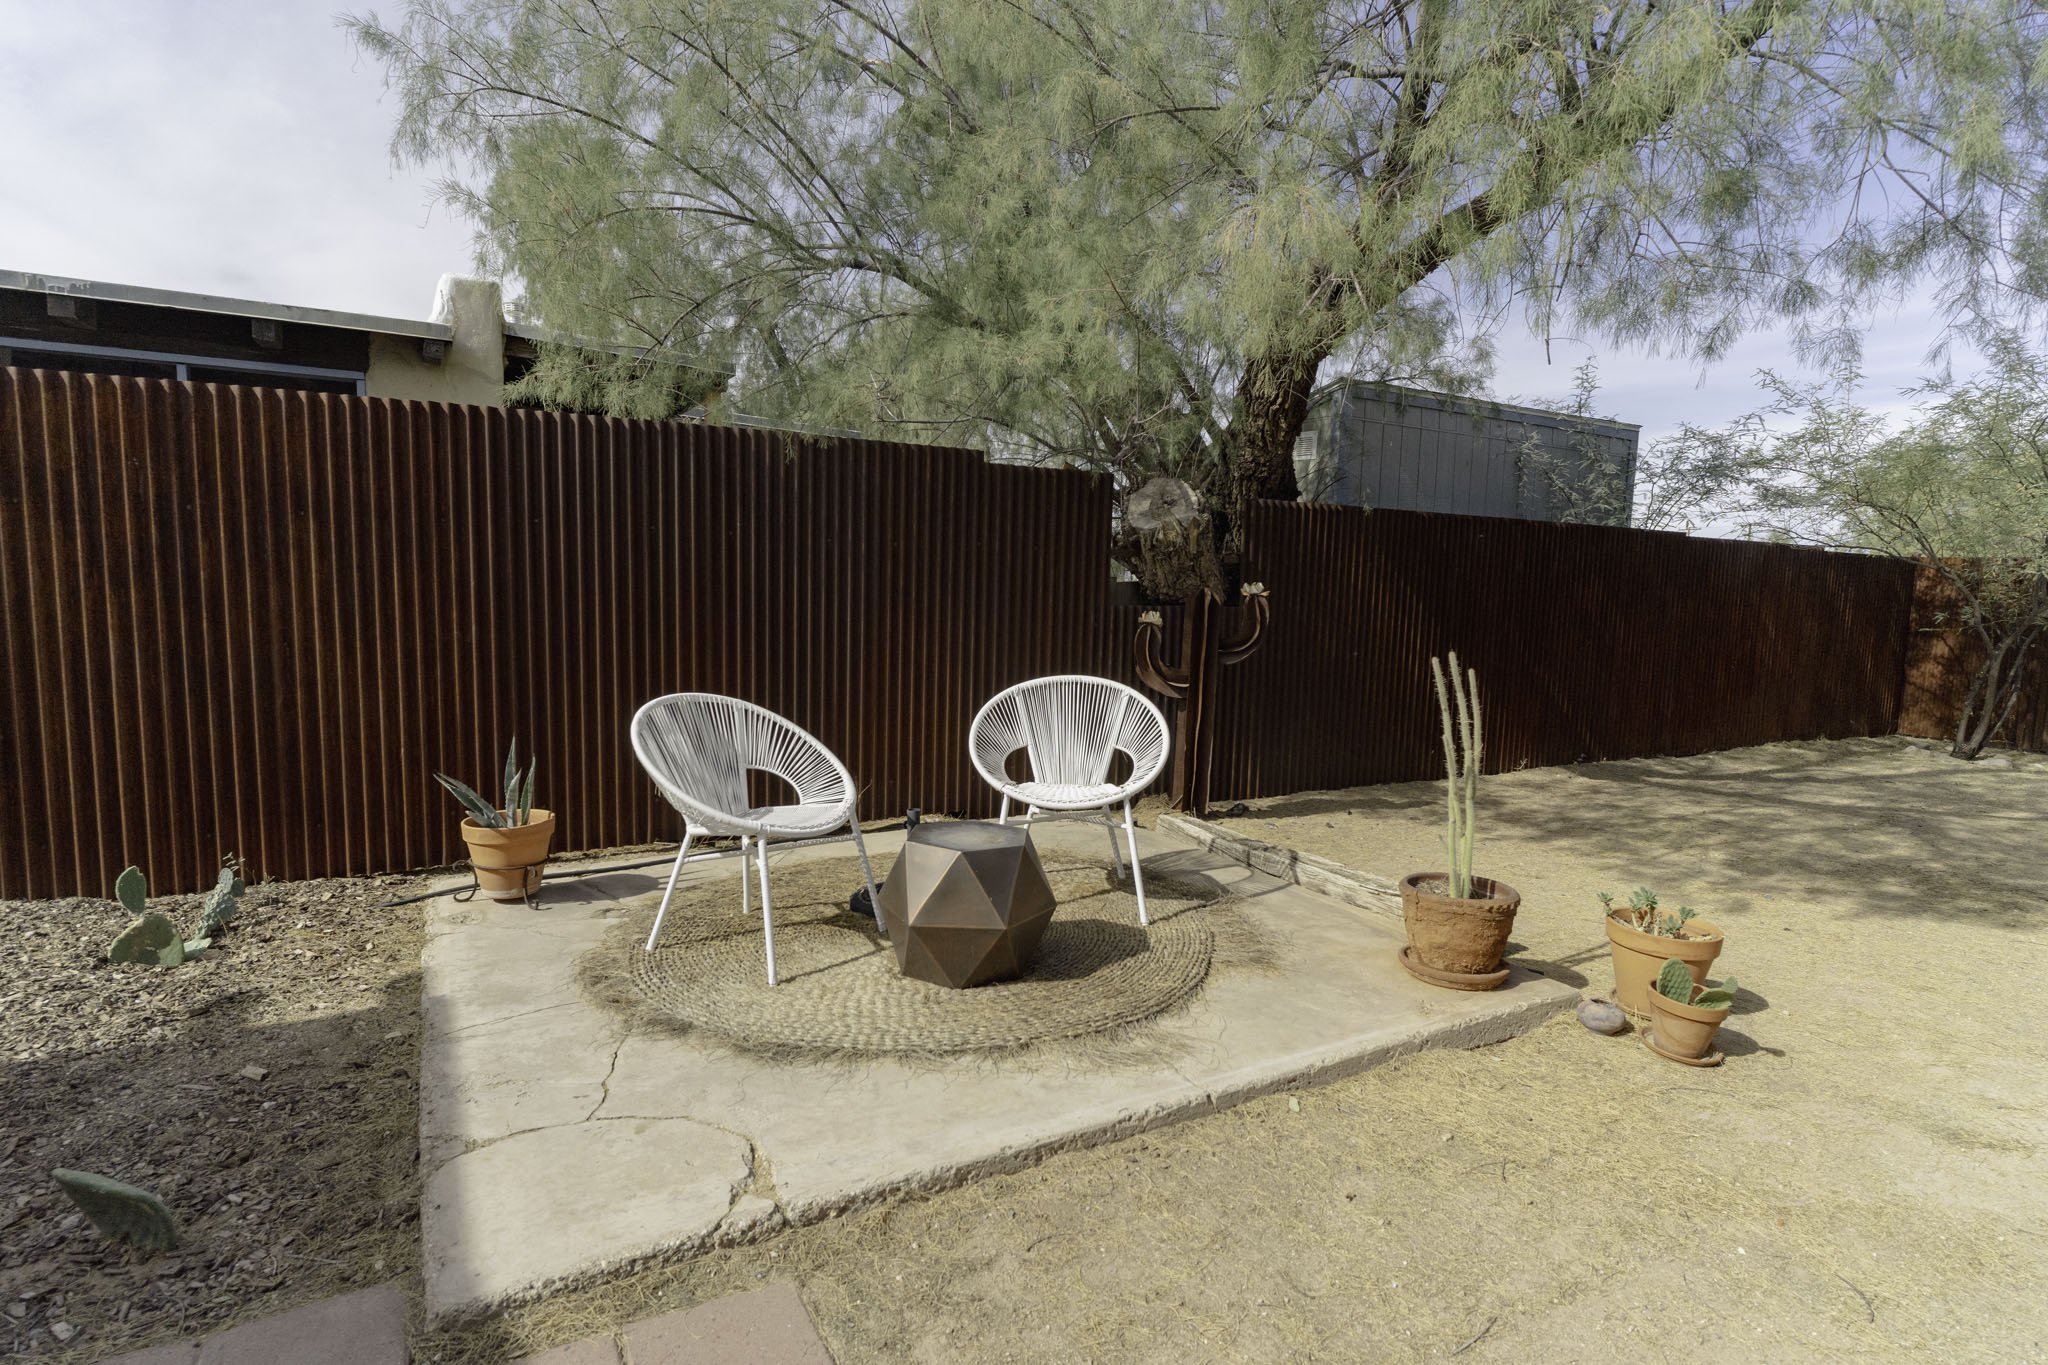 335-e-fontana-place-tucson-arizona-home-for-sale-listing-love-your-dirt-team-remax-excalibur-real-estate-20.jpg